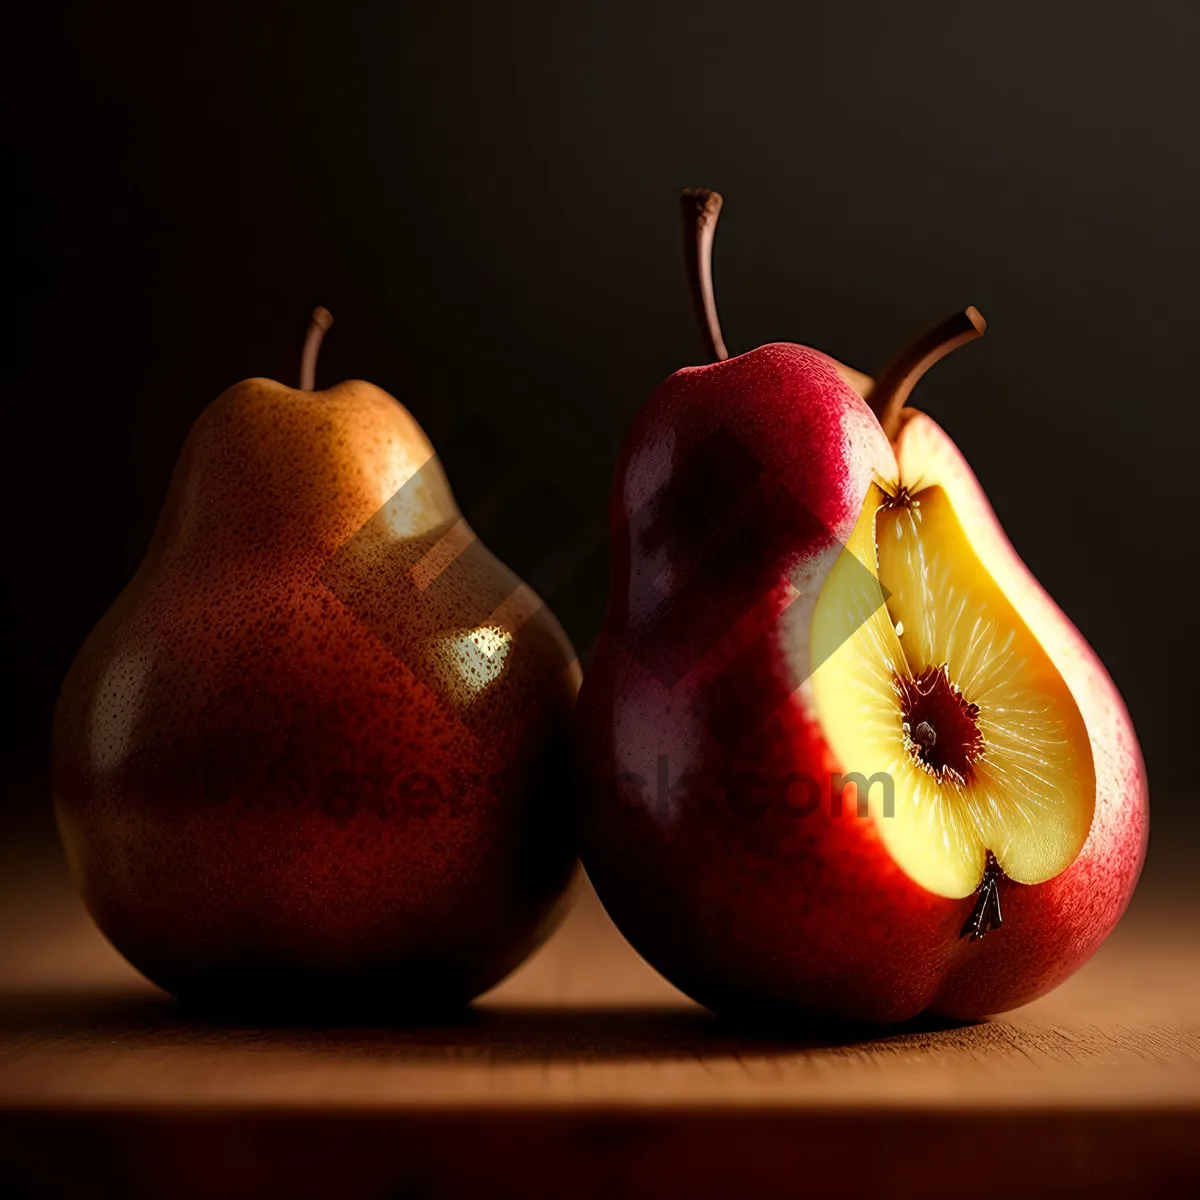 Picture of Juicy Organic Fruit Snack: Apples & Pears